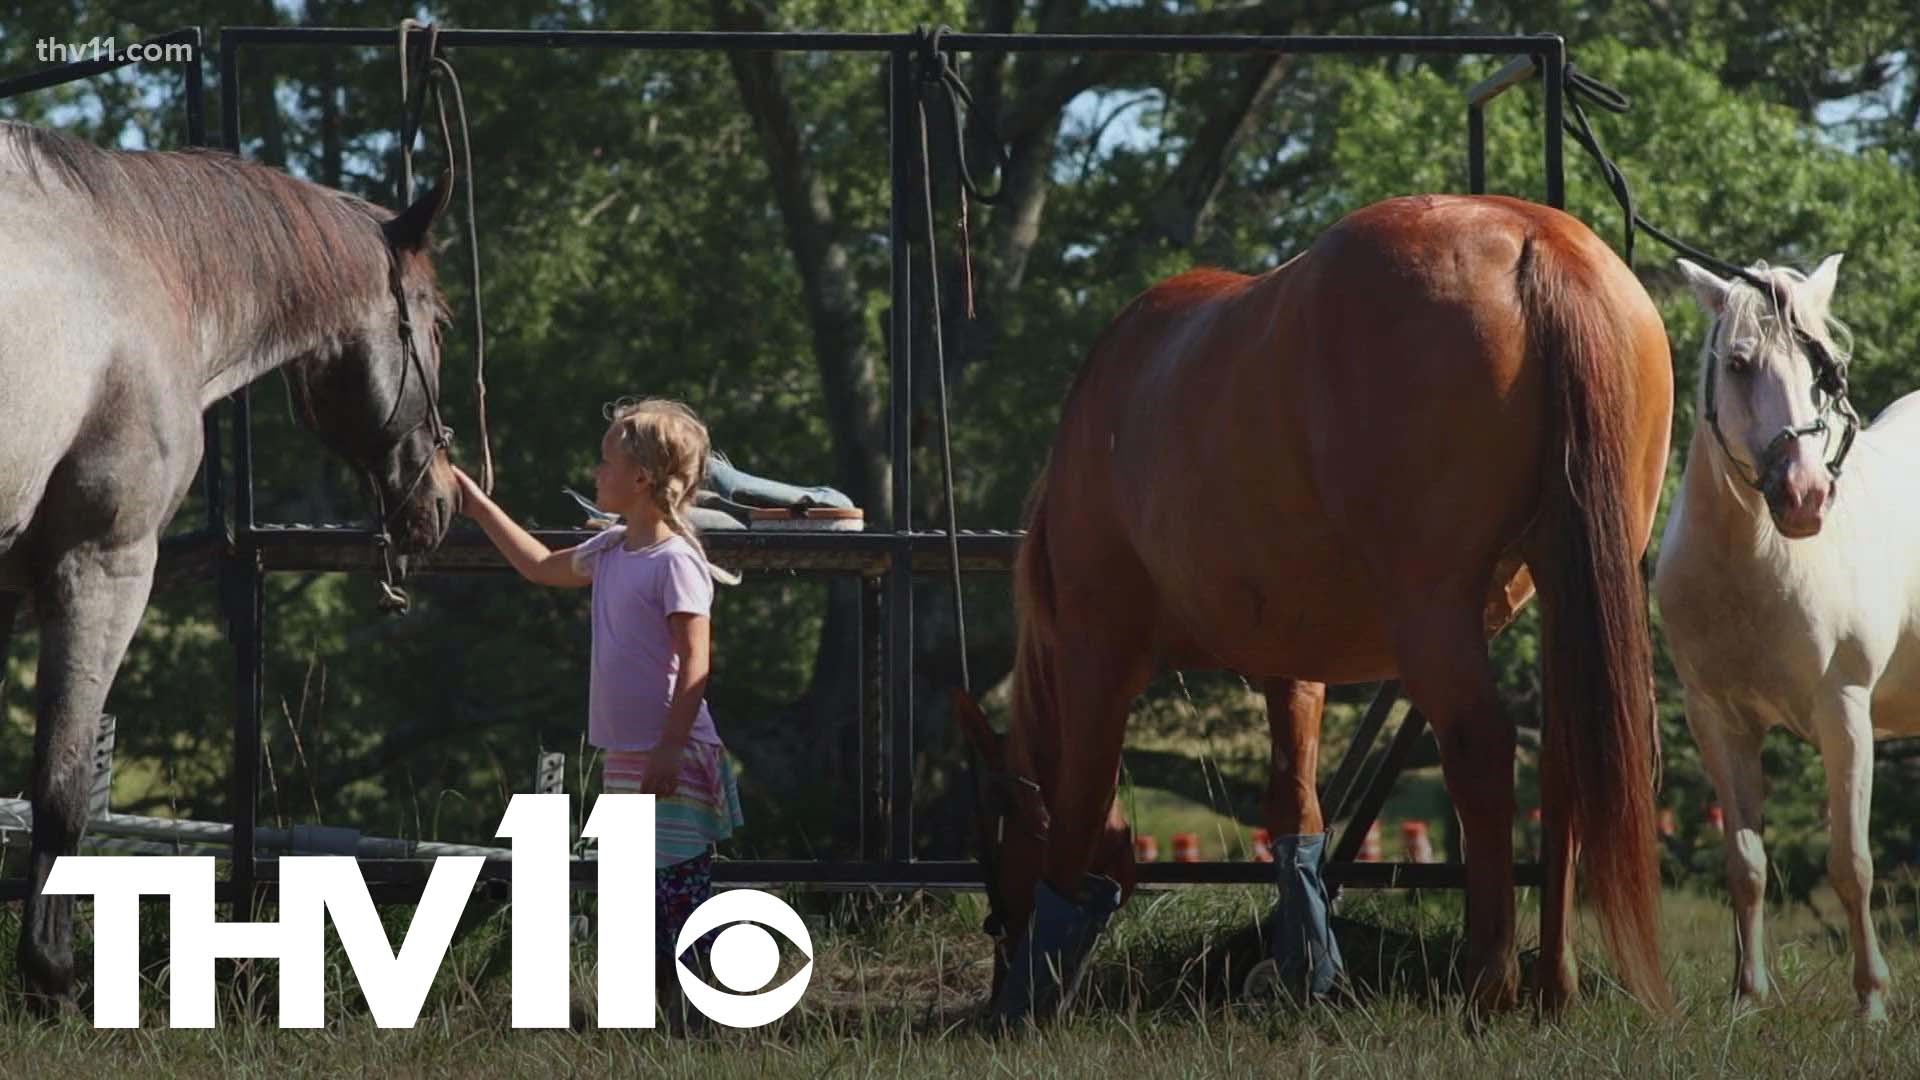 Riverlyn Scrimshire was diagnosed with a speech disorder weeks before her dad died in the line of duty. And through horse therapy, she was able to speak again